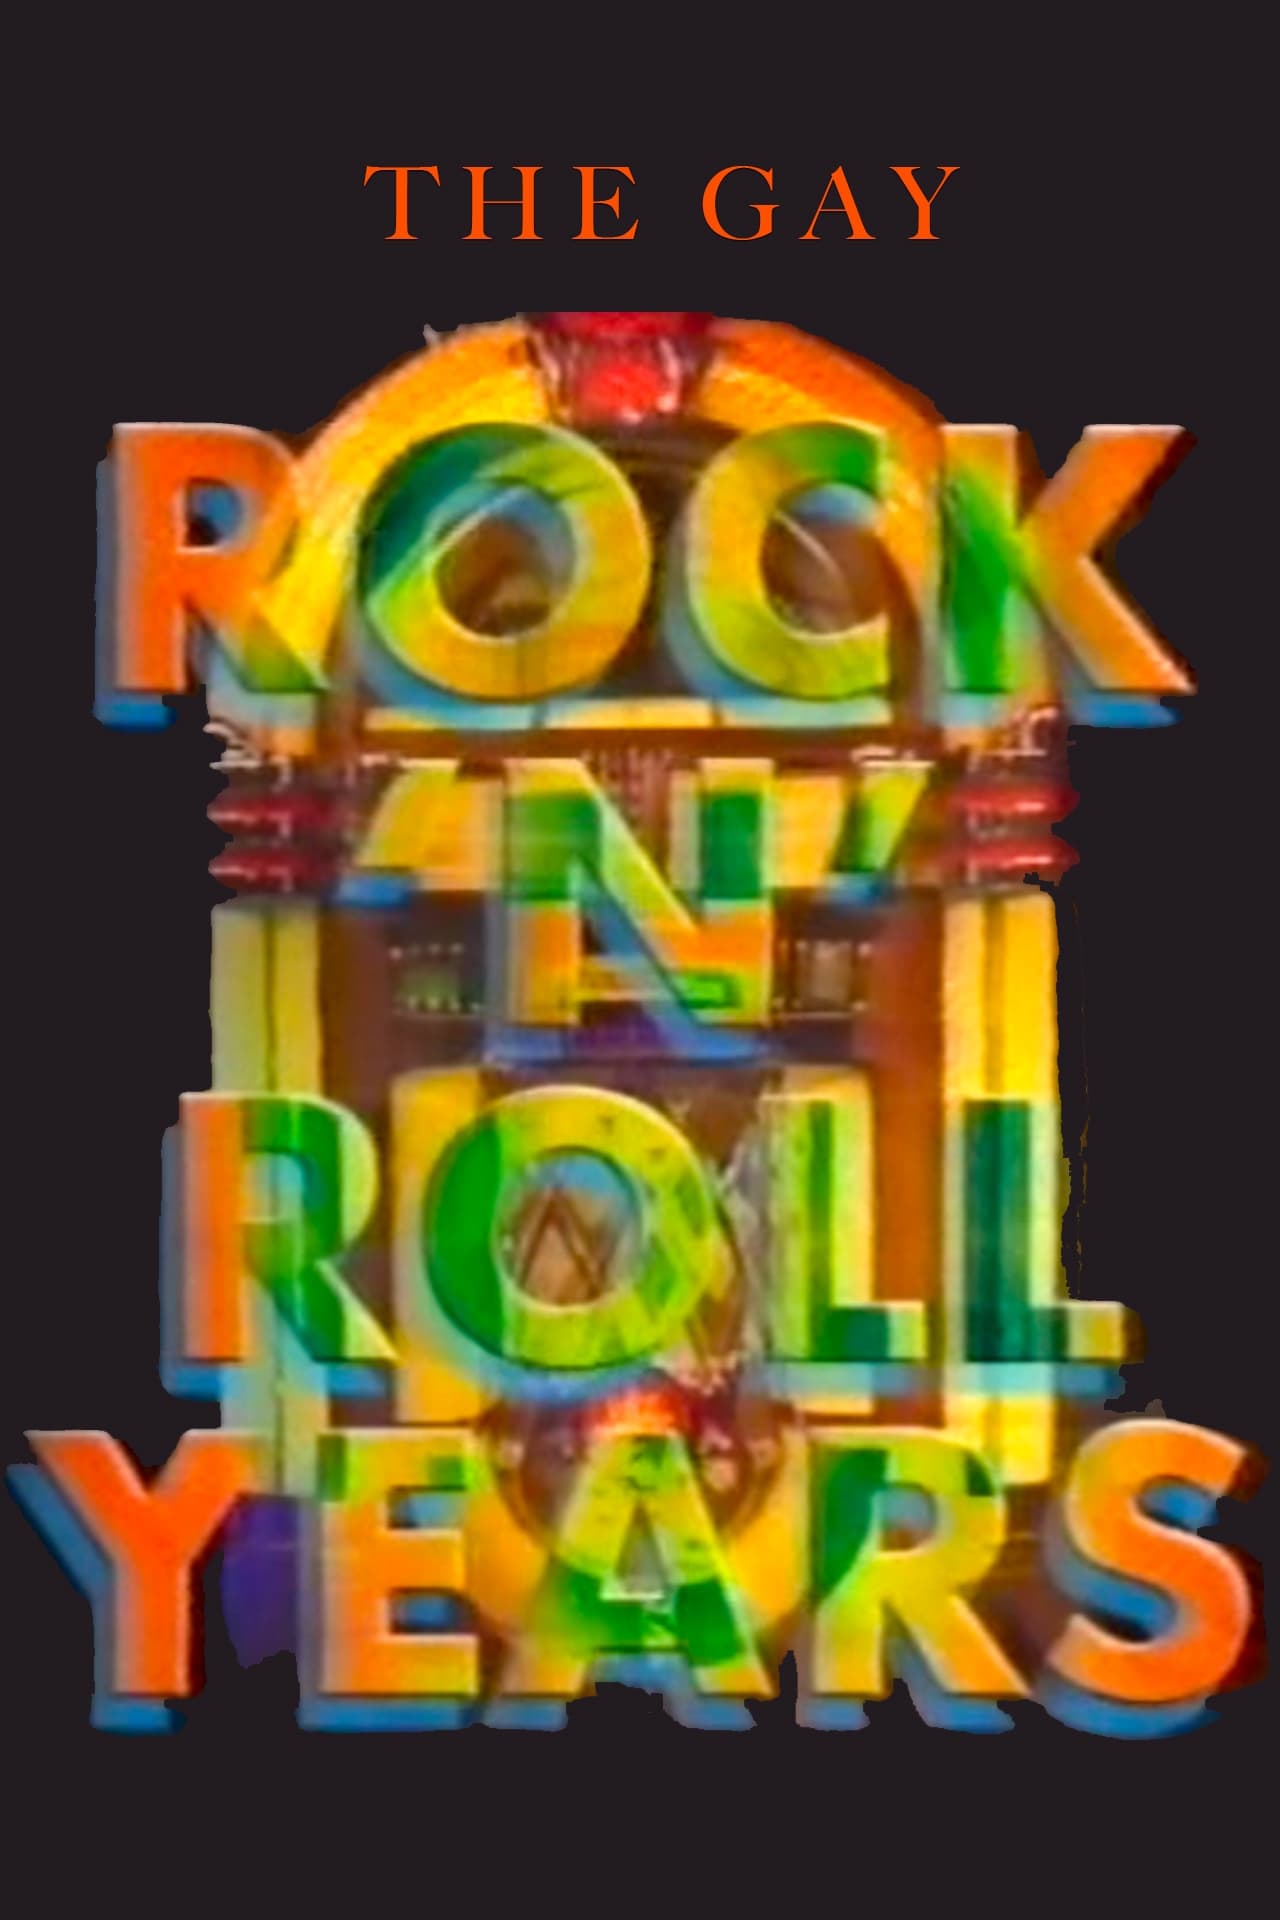 The Gay Rock & Roll Years